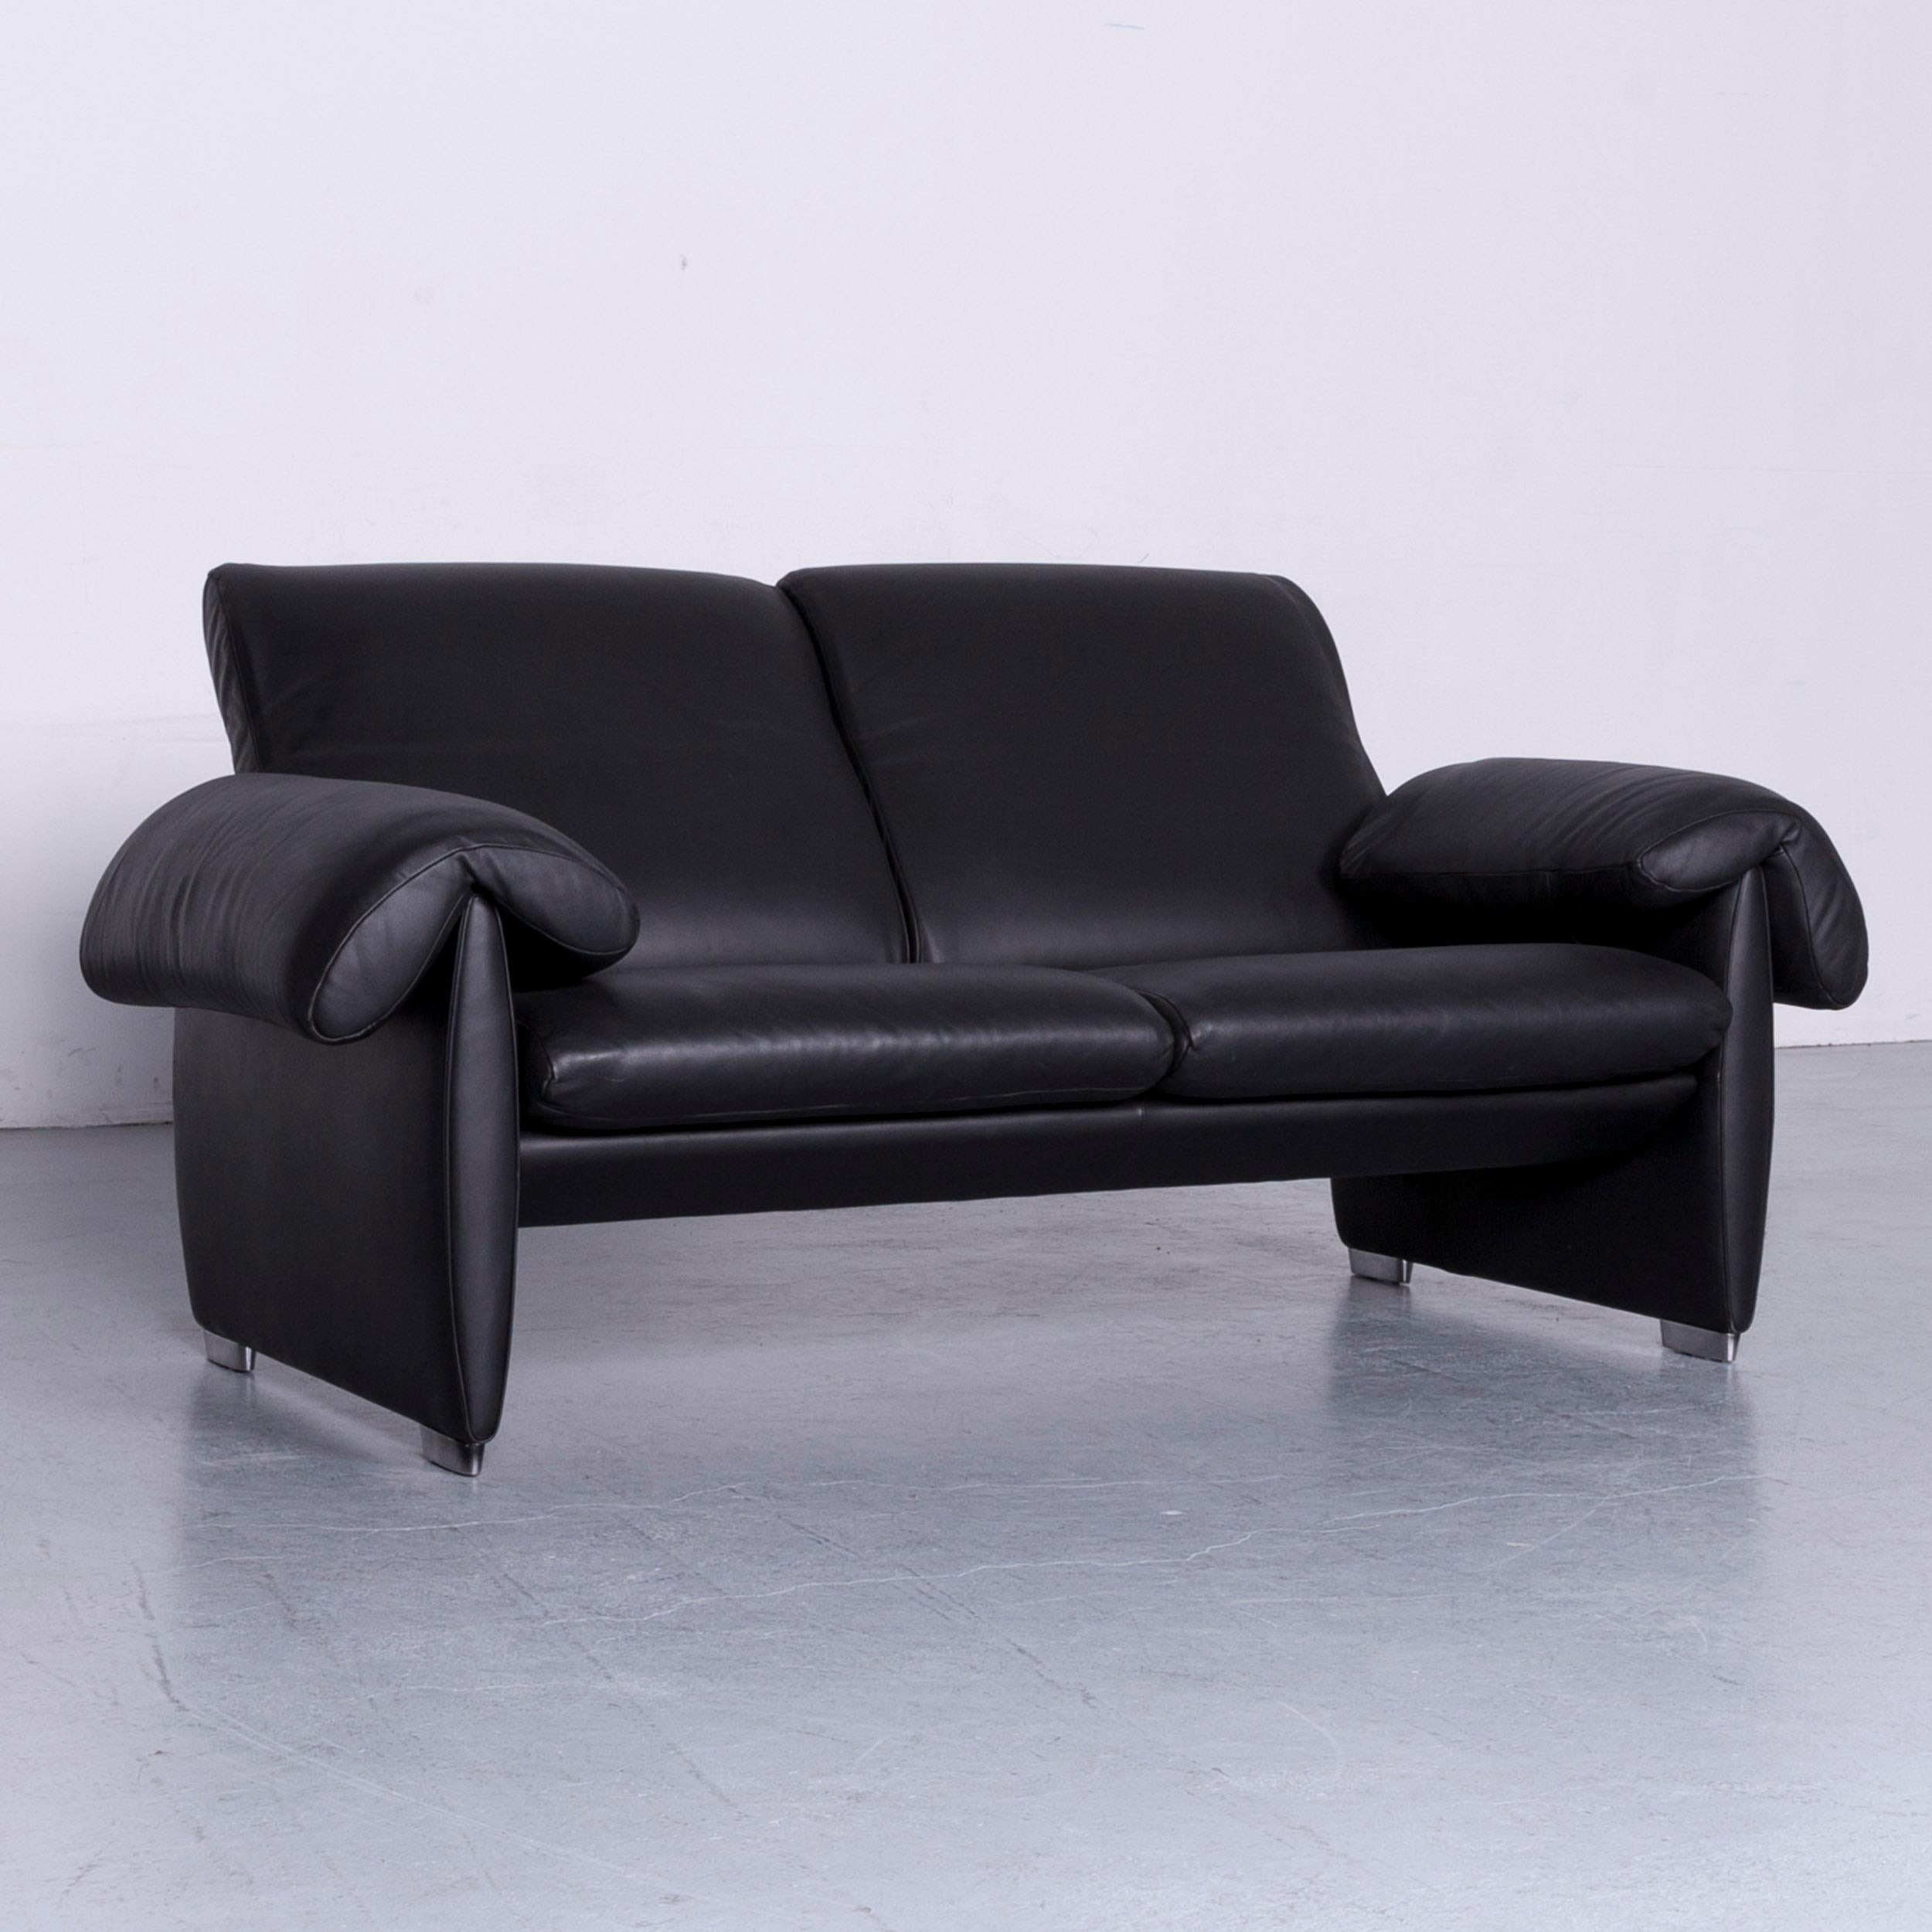 De Sede DS 10 Designer Sofa Black Leather Three-Seat Two-Seat Set Couch 8